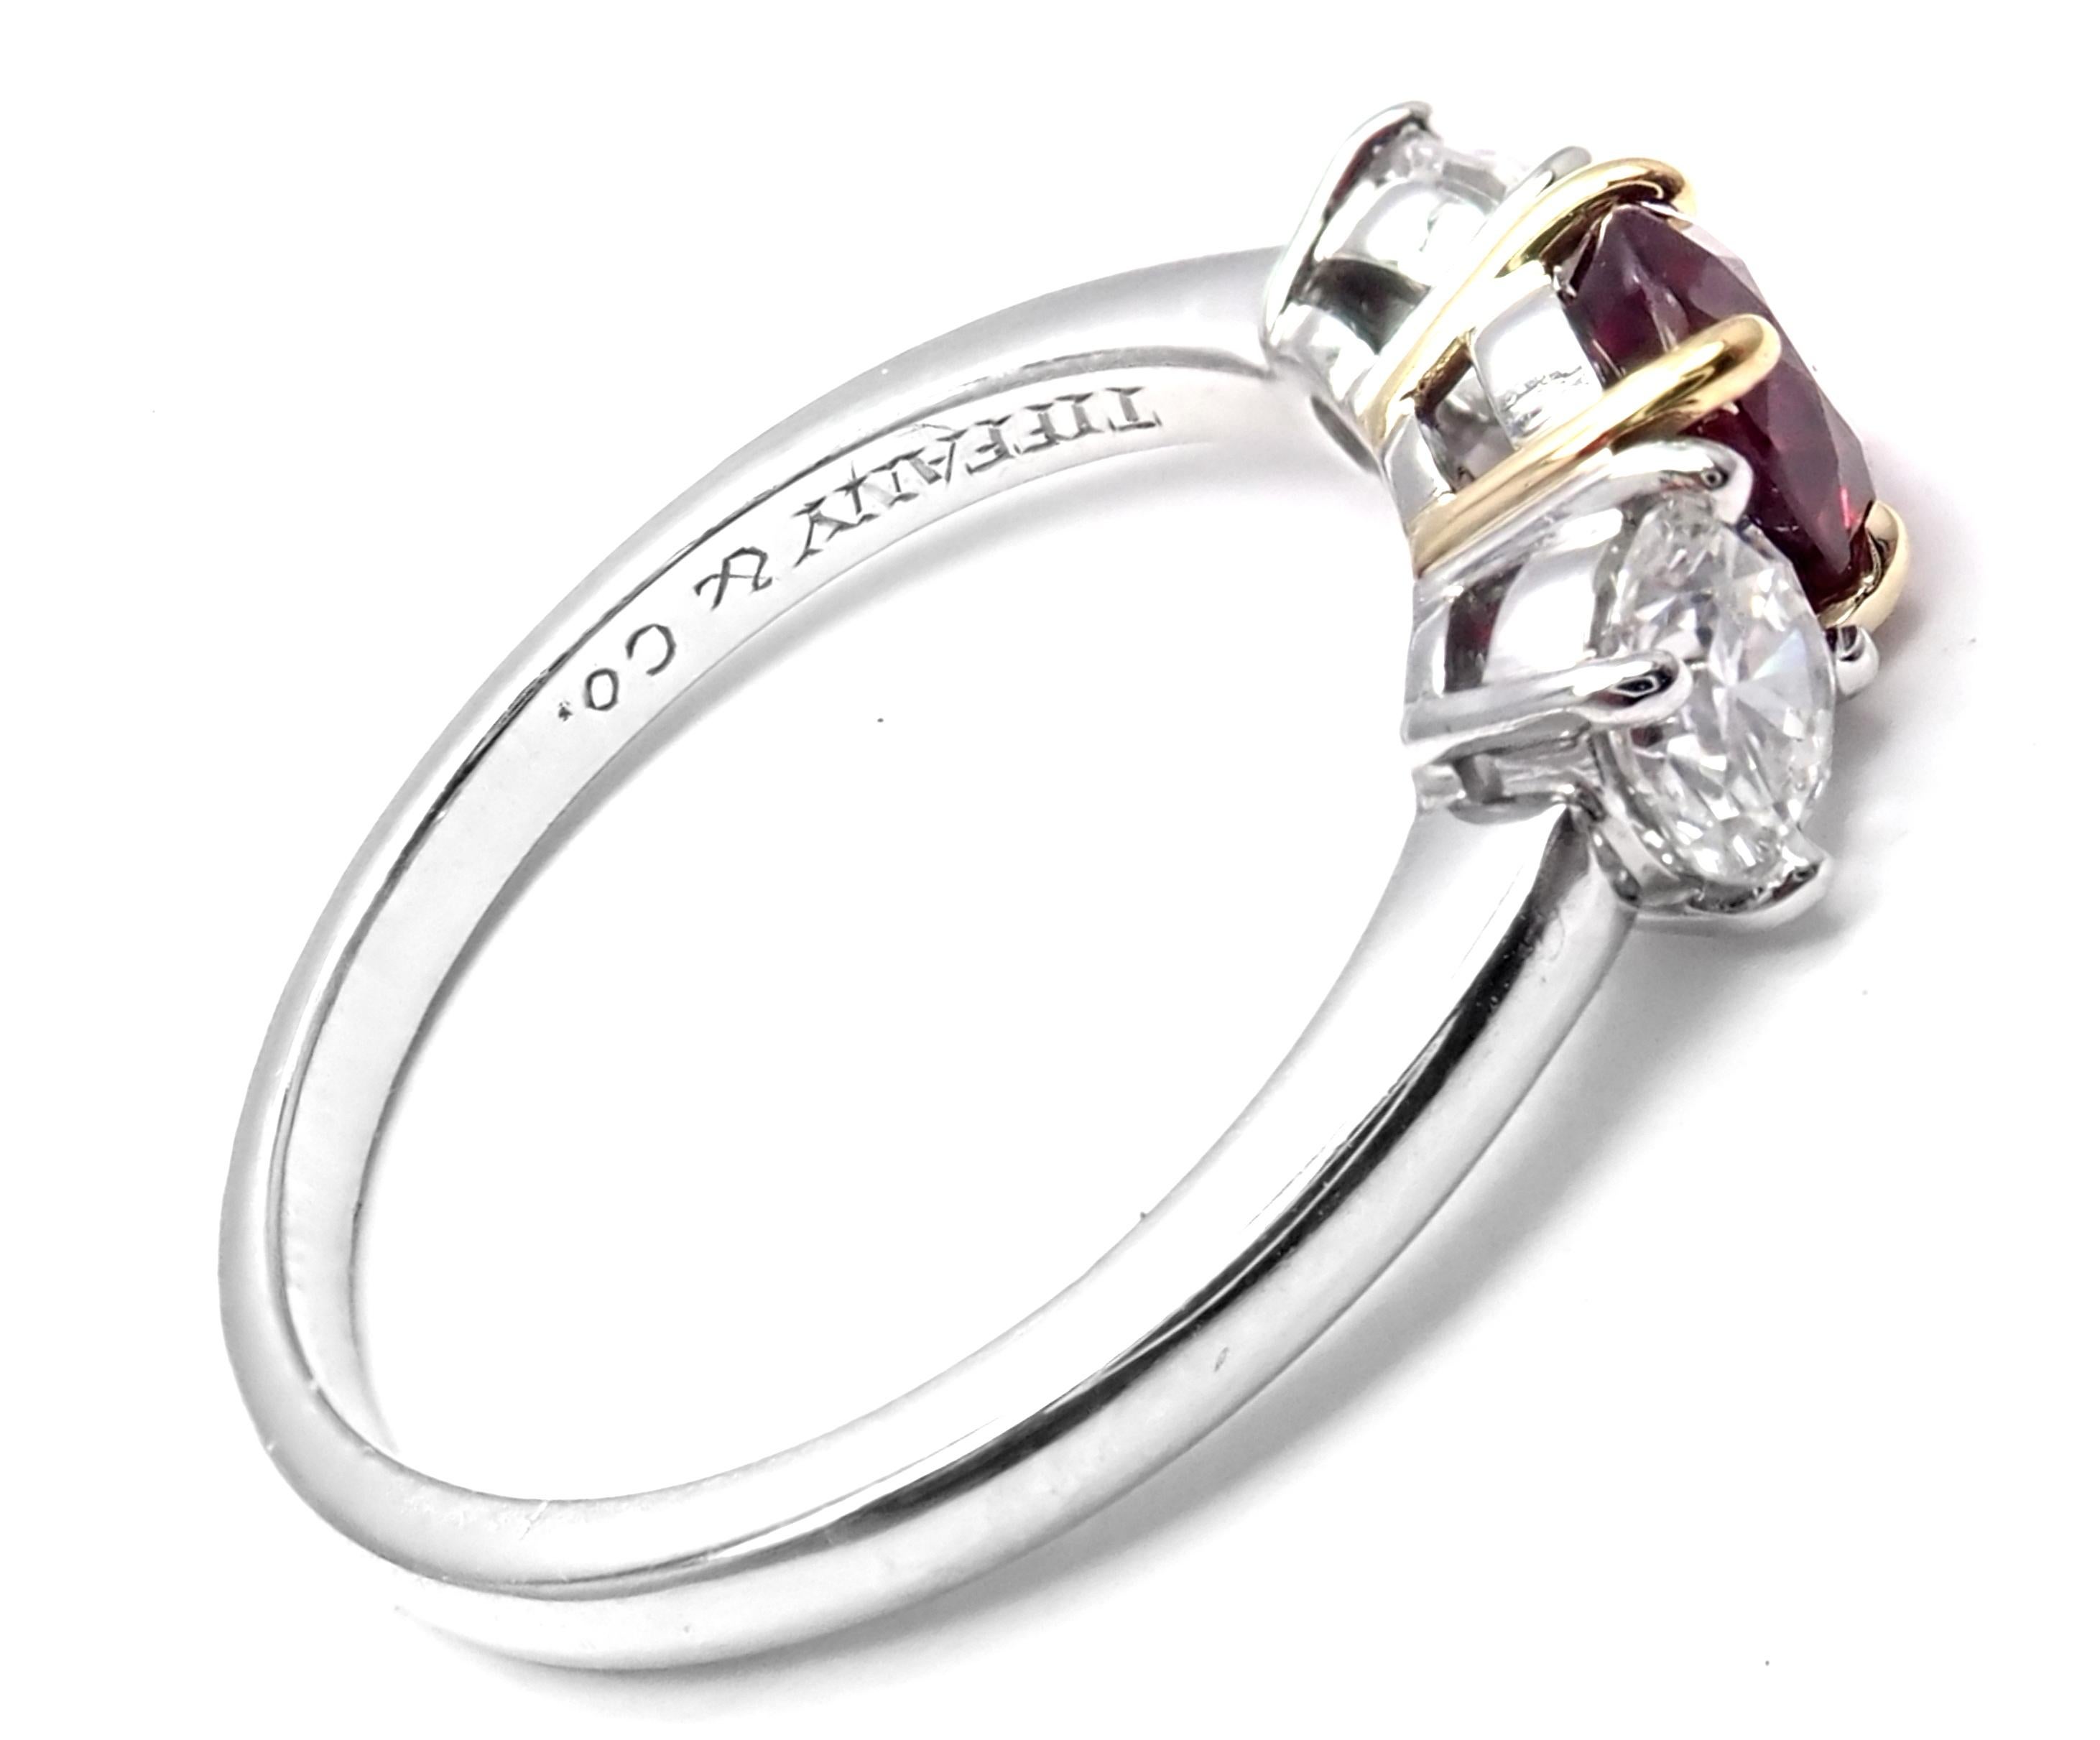 Platinum And 18k Yellow Gold Diamond And Ruby Three Stone Band Ring by Tiffany & Co. 
With 22 Round Brilliant Cut Diamonds VS1 clarity, G color, Total weight Approx .60ctw
1 Round Ruby total weight approx.  0.60ct
Details:
Ring Size: 6
Width: